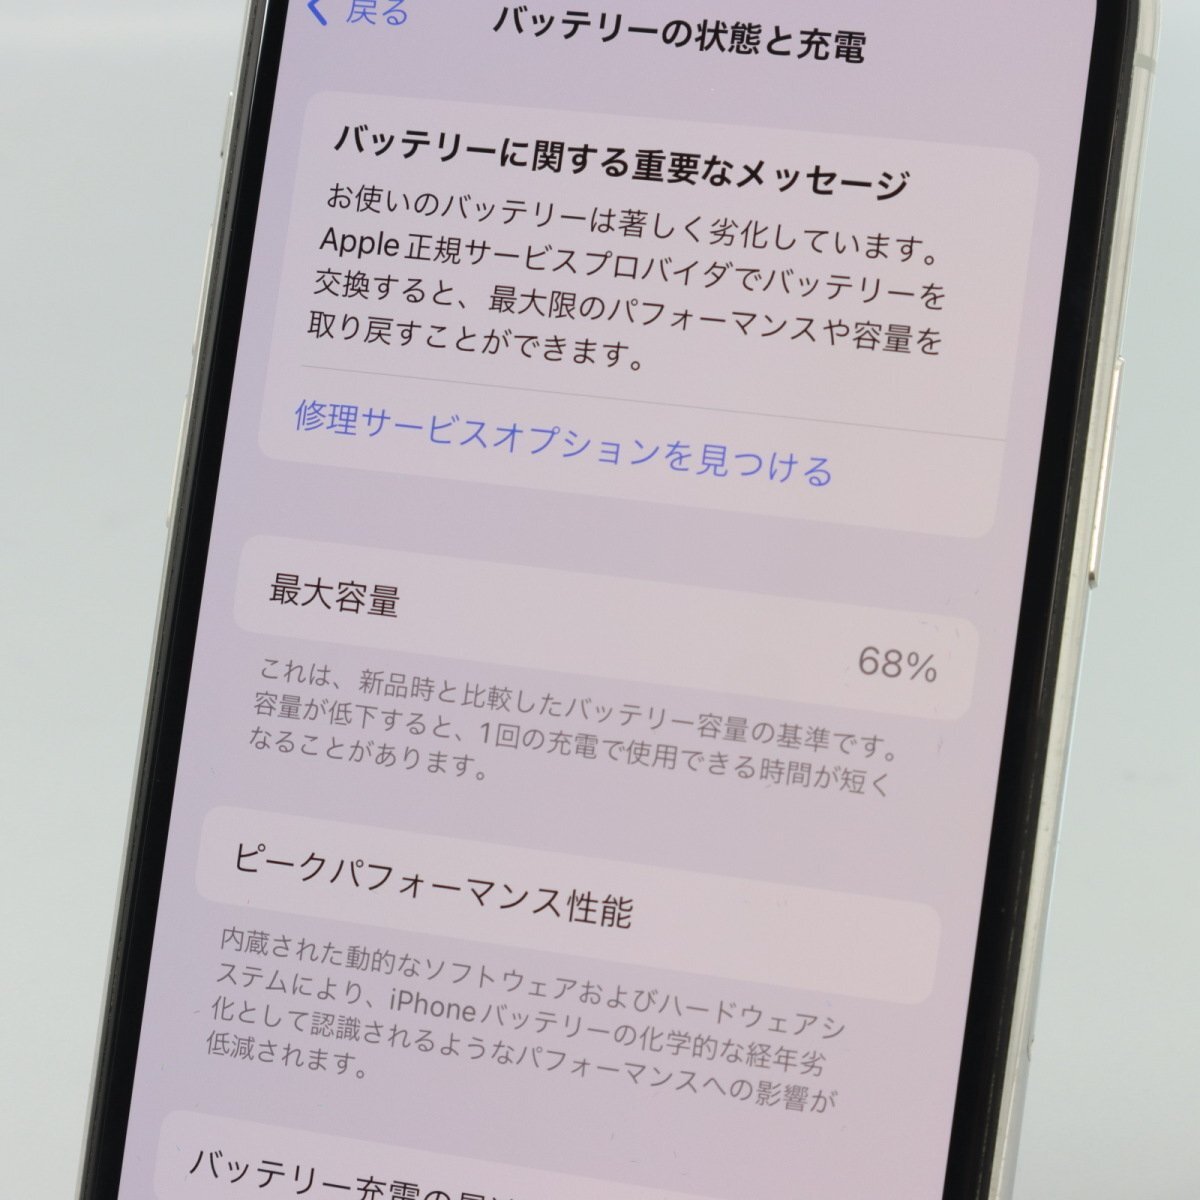 Apple iPhone11 Pro 256GB Silver A2215 MWC82J/A バッテリ68% ■ソフトバンク★Joshin2644【1円開始・送料無料】の画像5